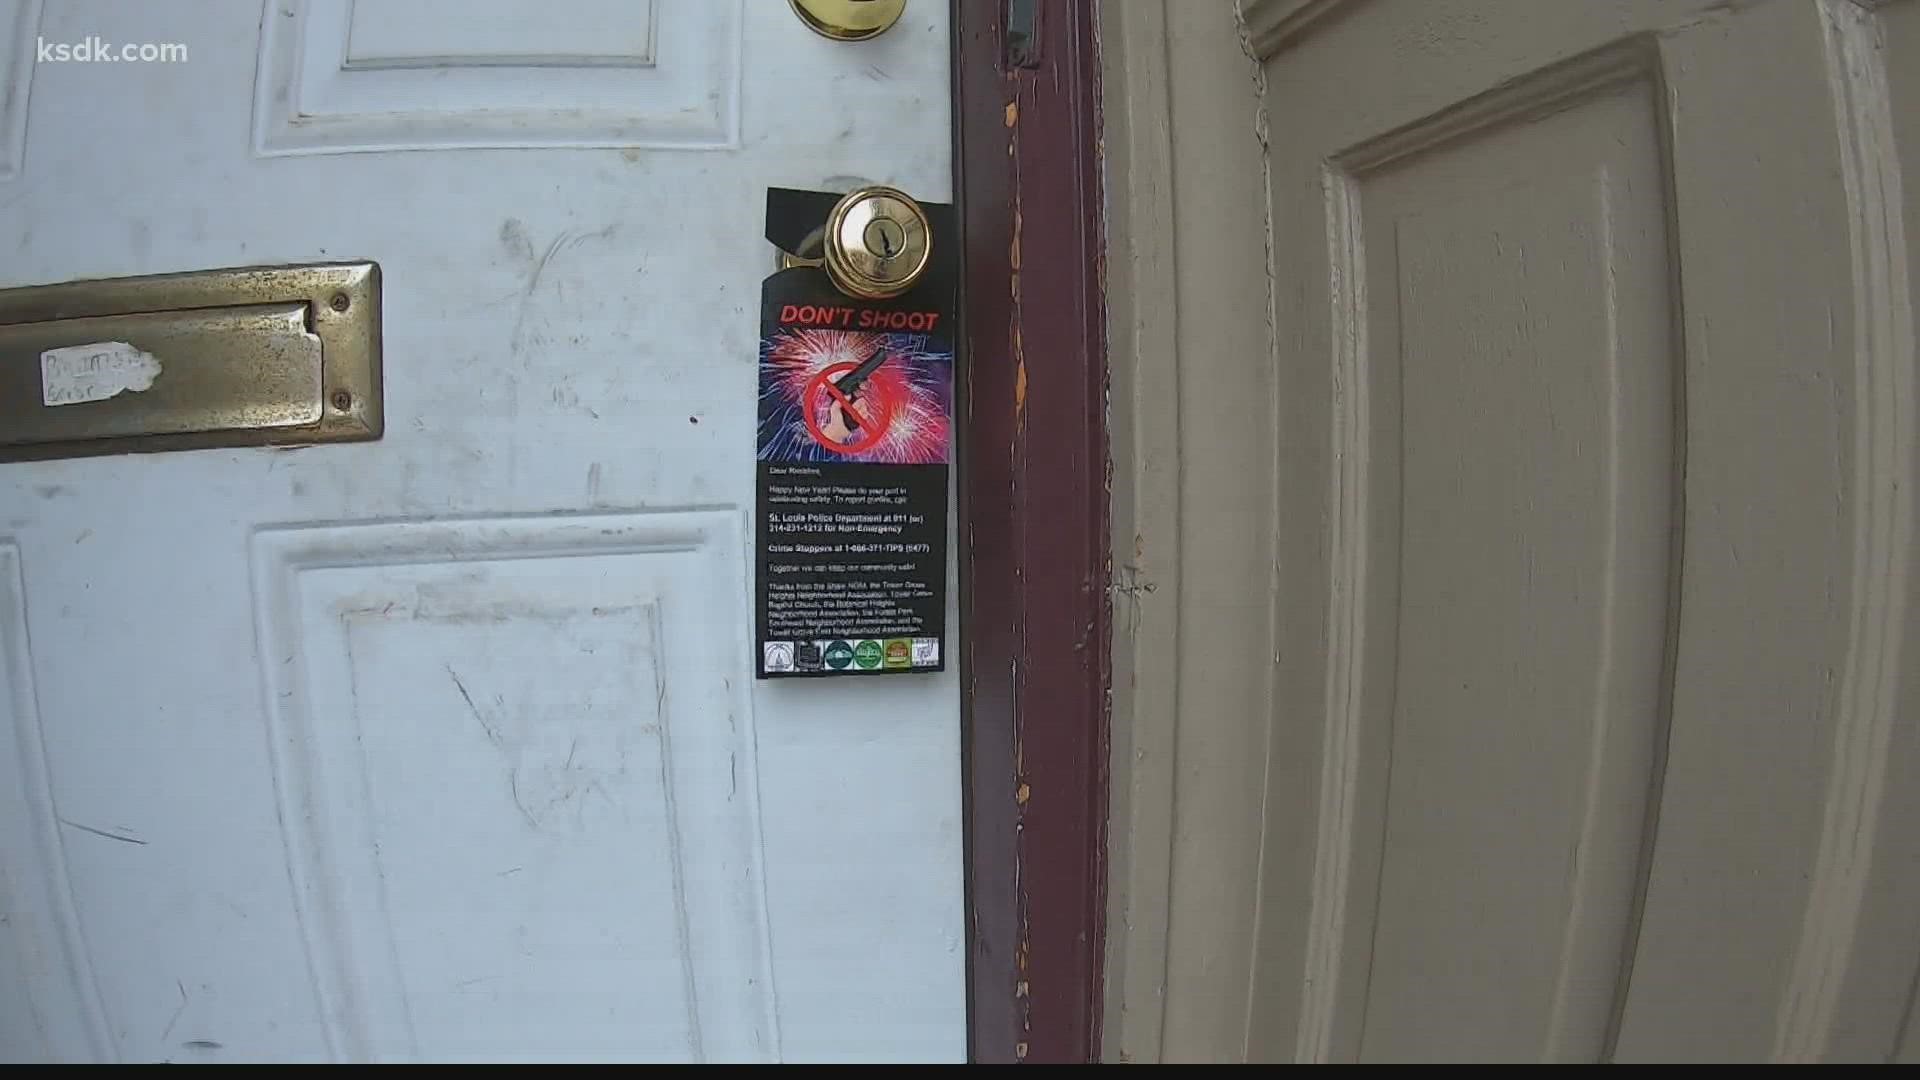 Many community organizations are spreading the message that New Year's Eve gunfire is not welcome. Police are patrolling for gunshots Friday night.